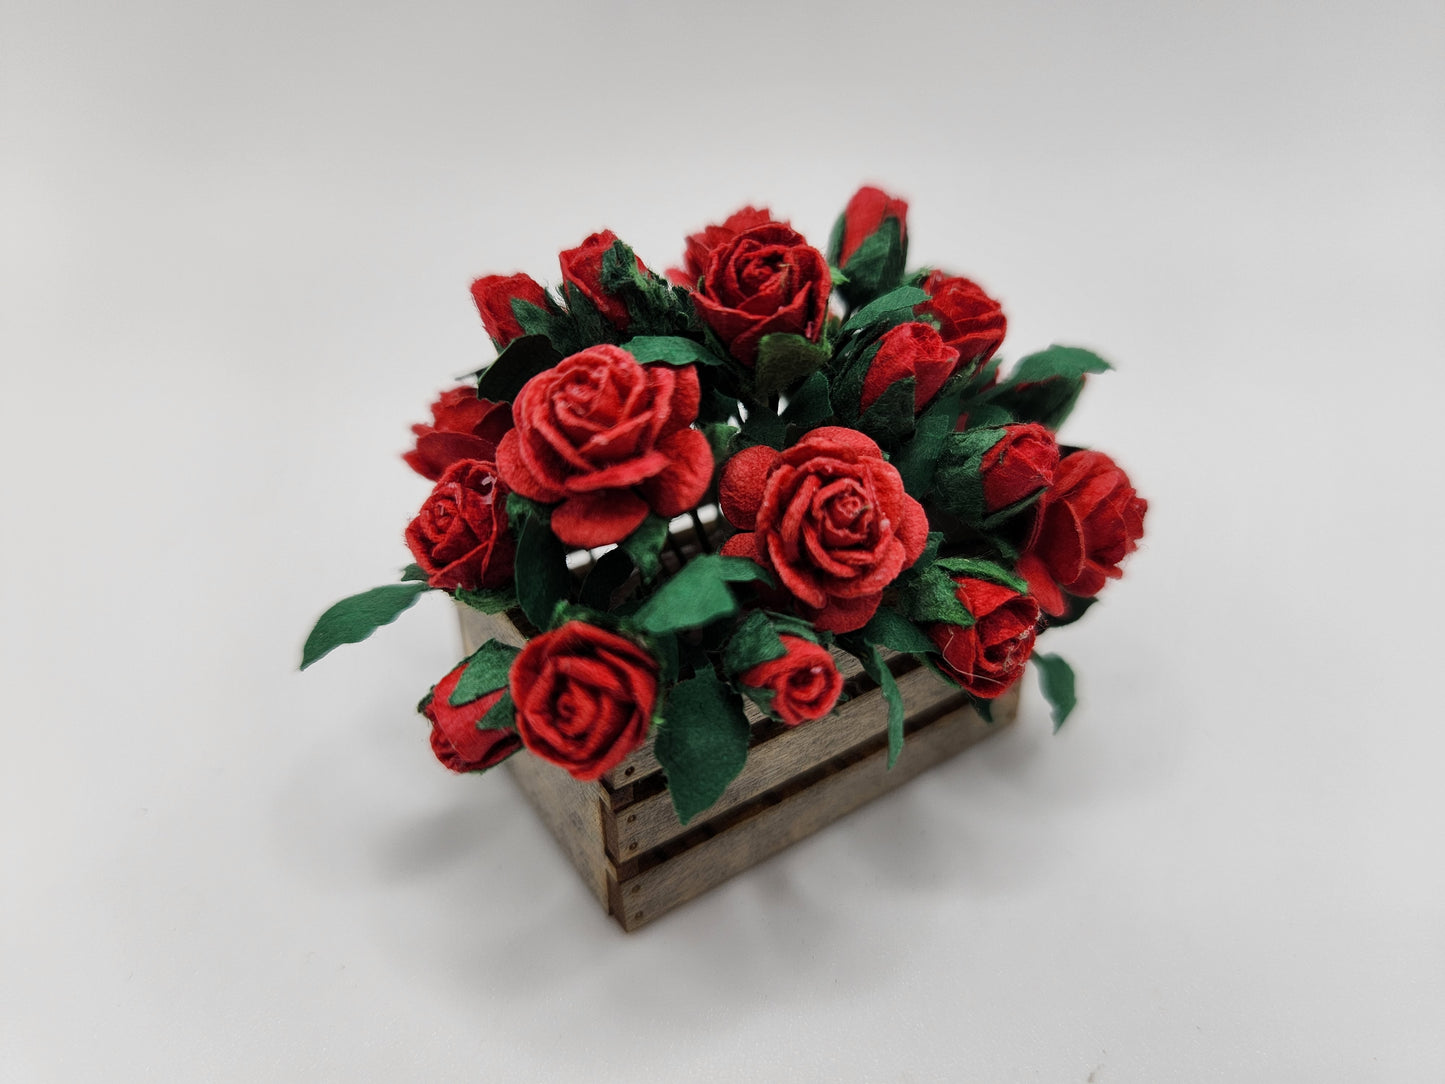 Crate of Roses